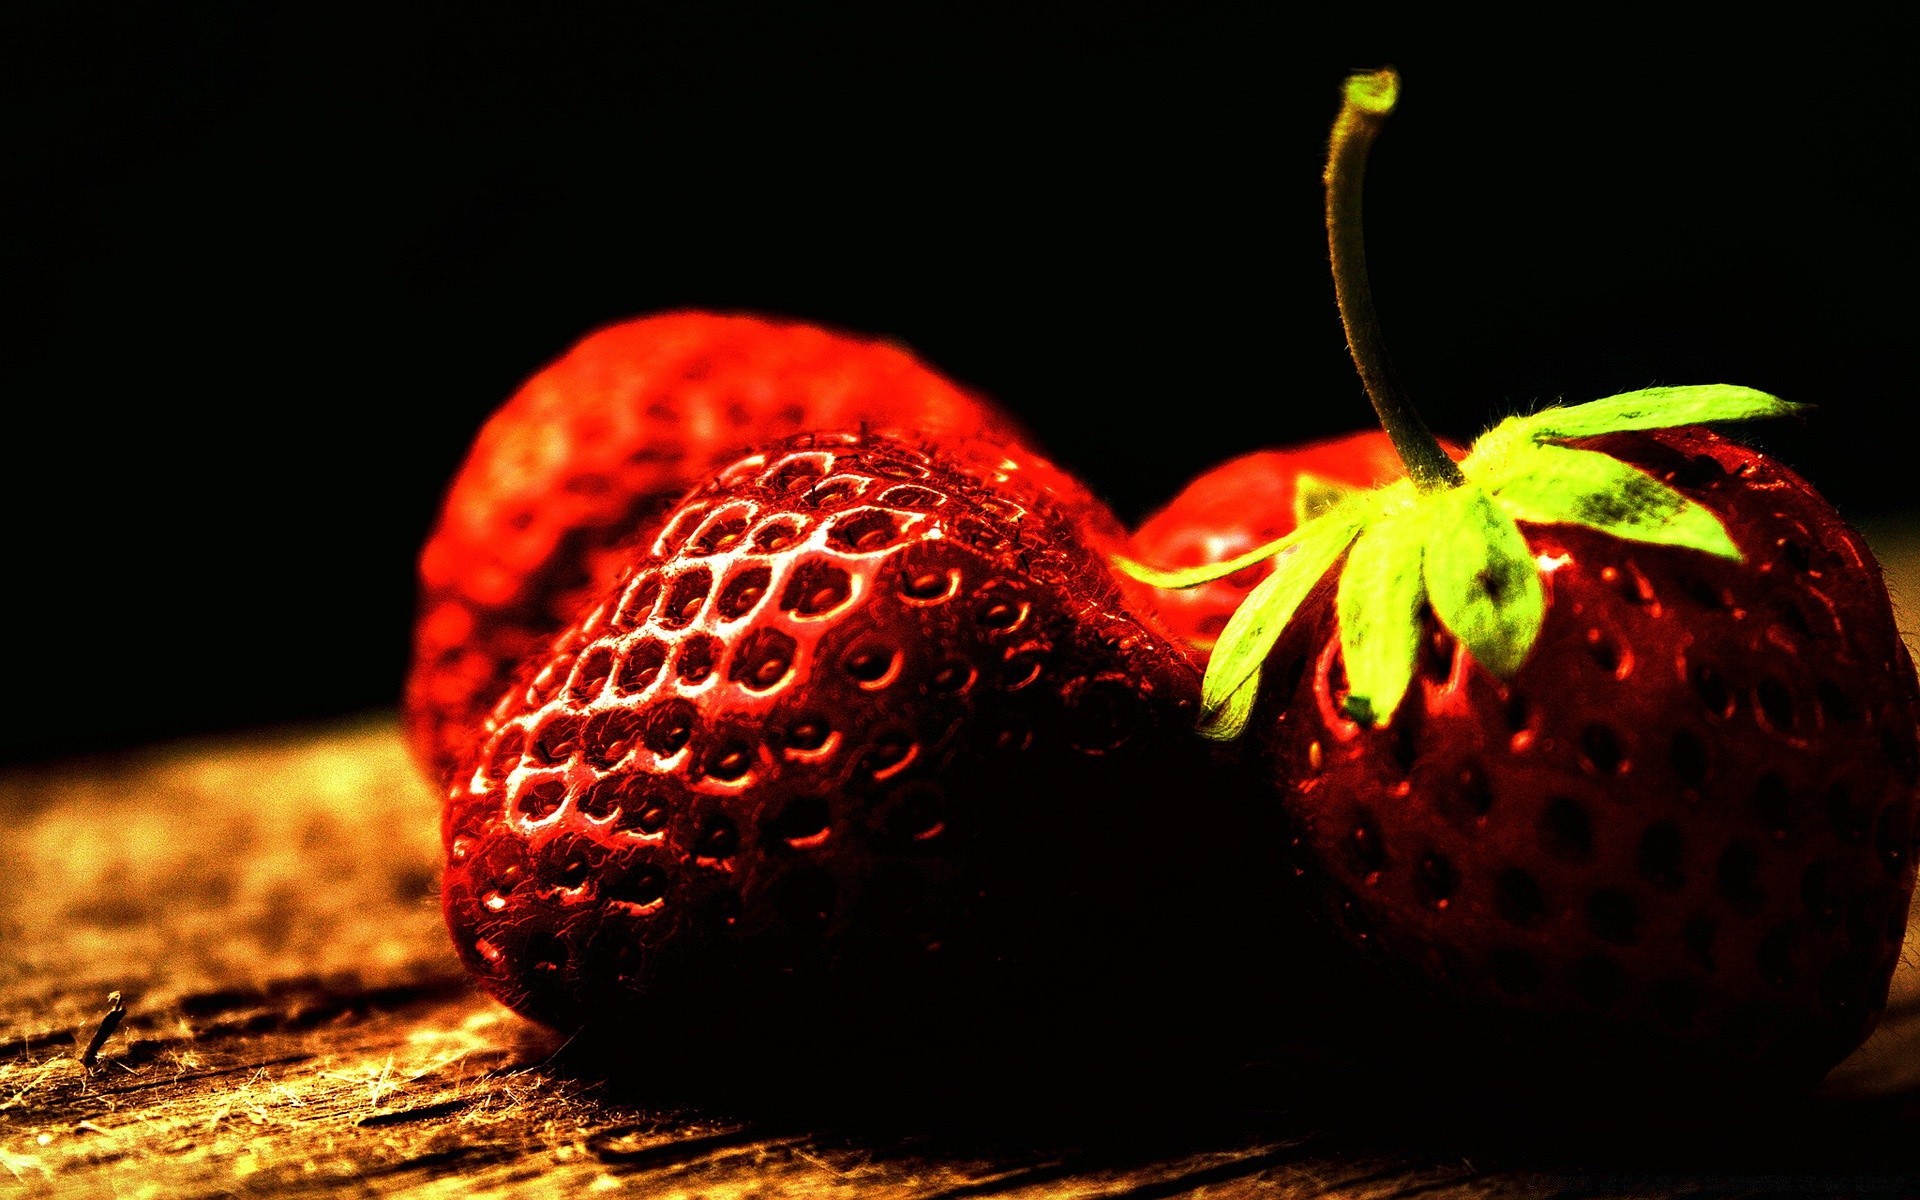 fruit strawberry berry food grow confection juicy delicious shining sweet nature one still life health leaf agriculture nutrition